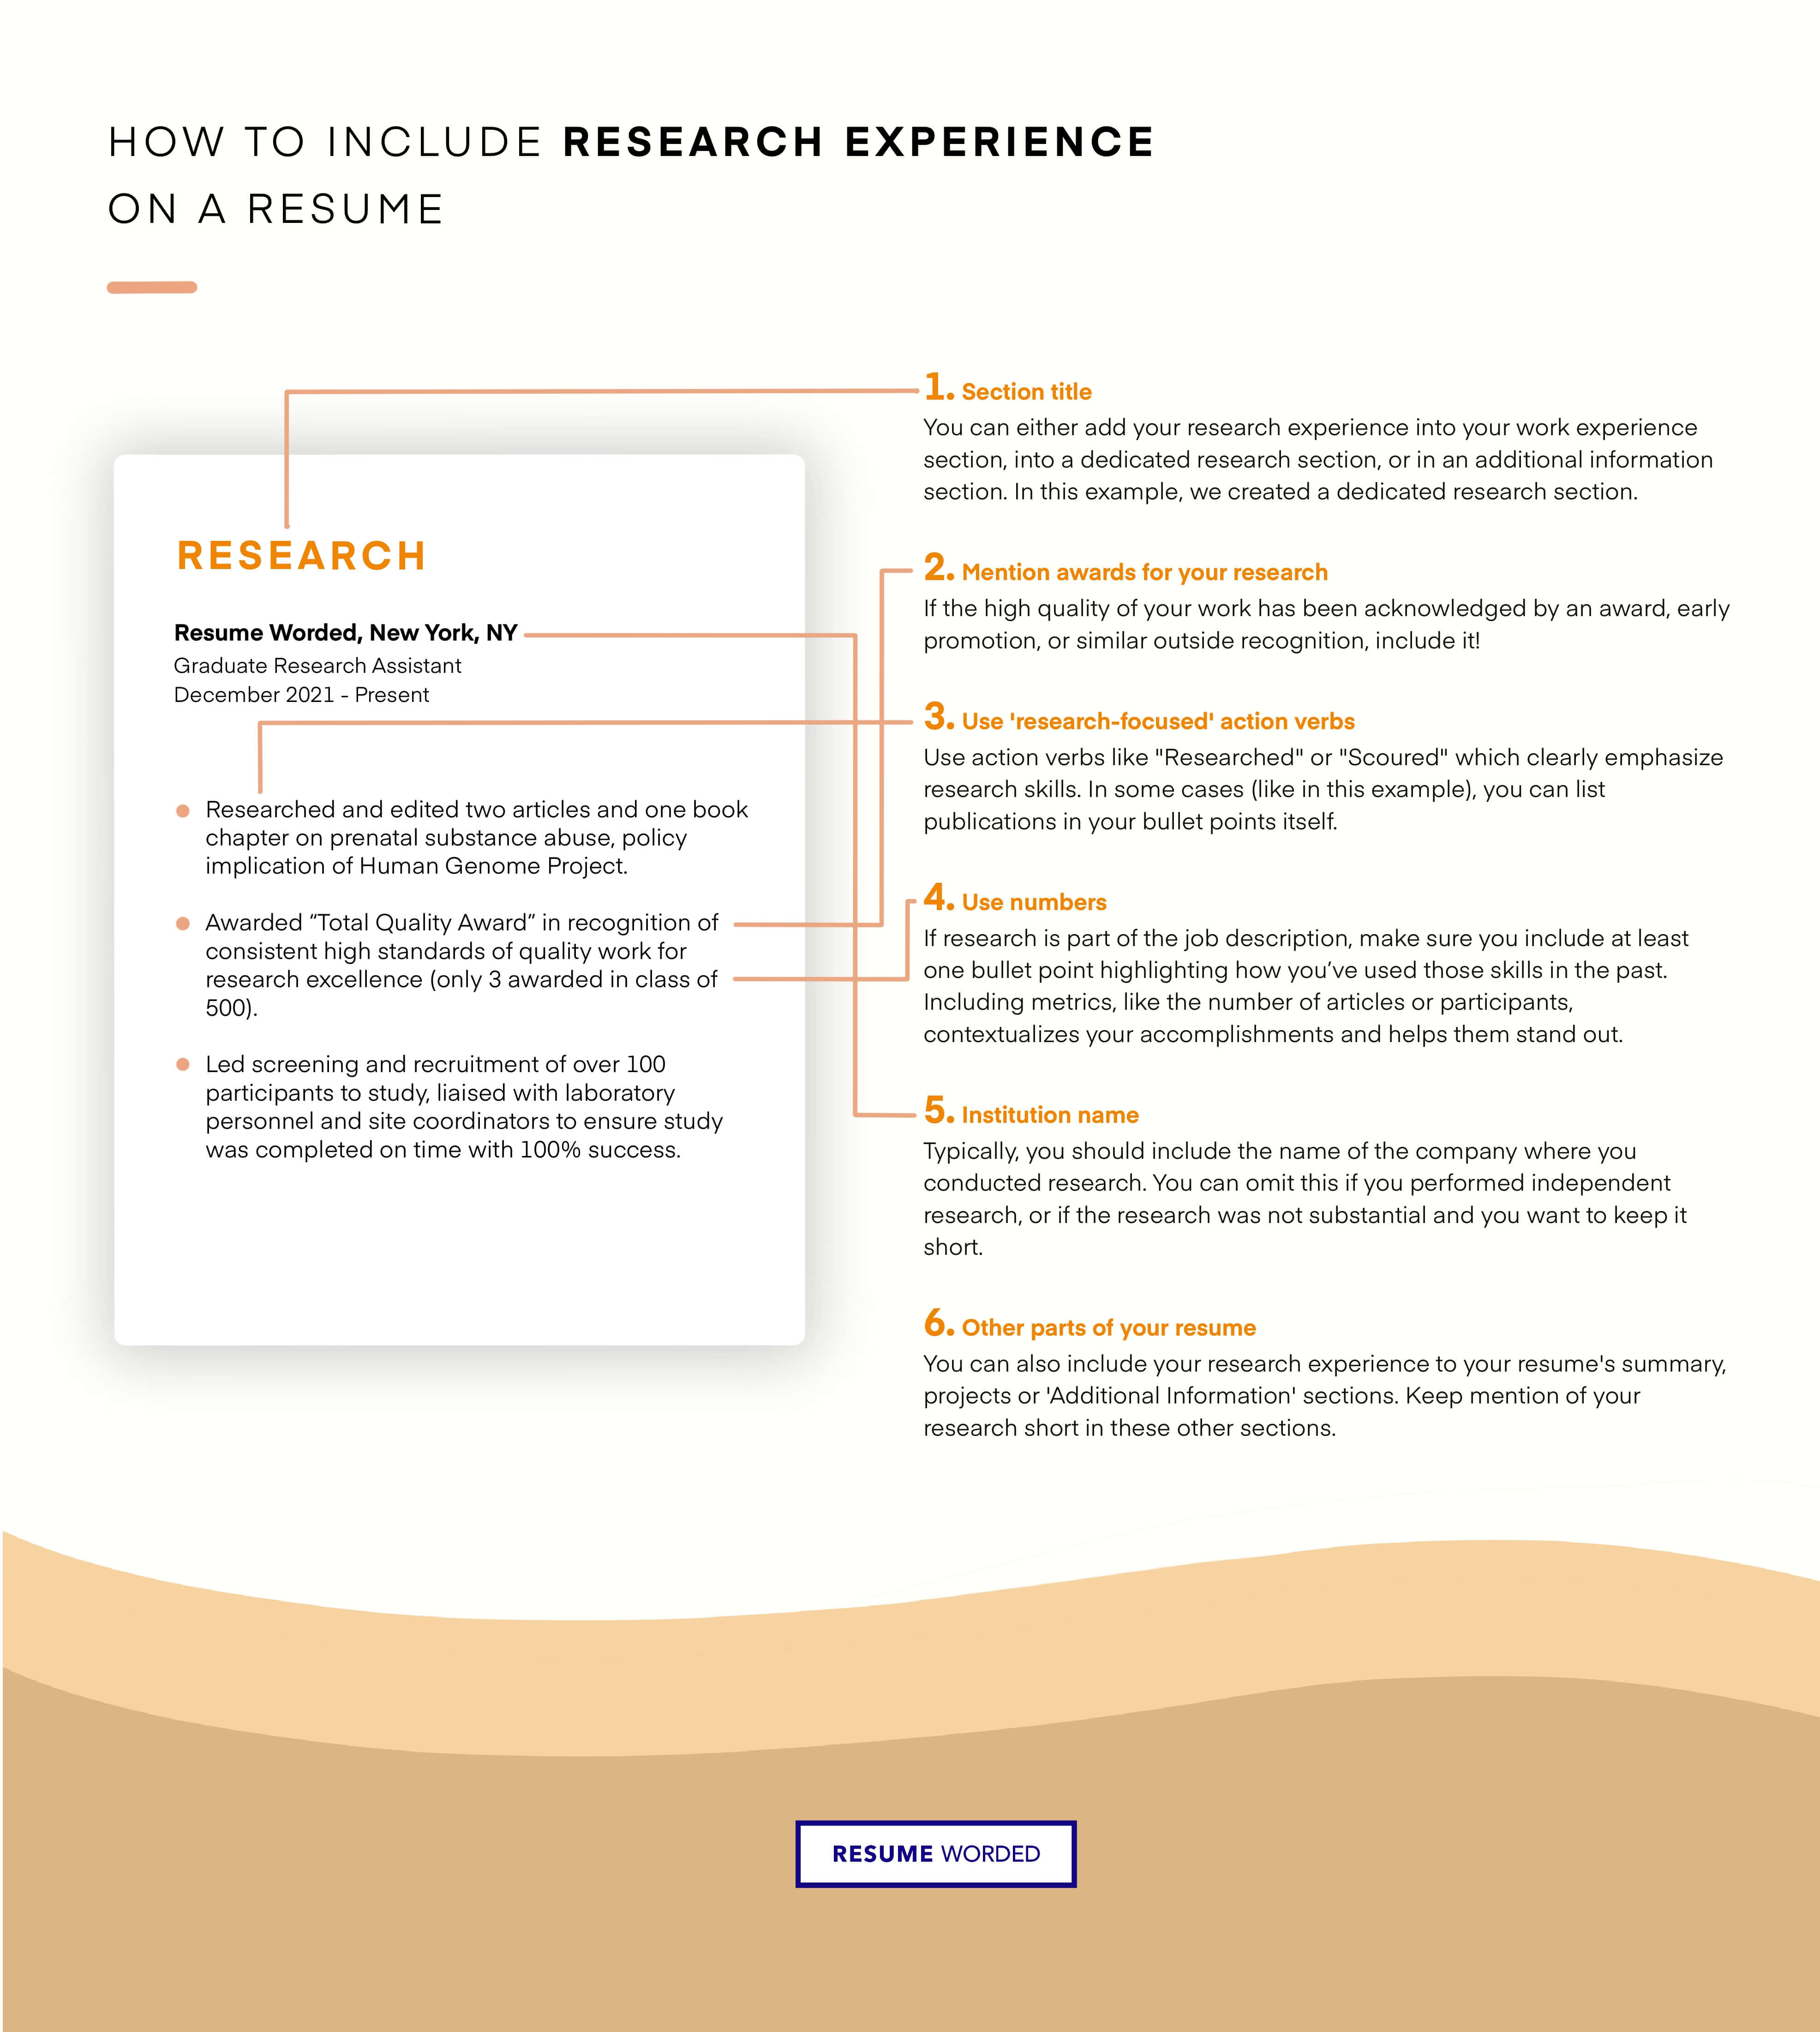 Demonstrate your research and data analytics. - Strategic Sourcing Manager Resume